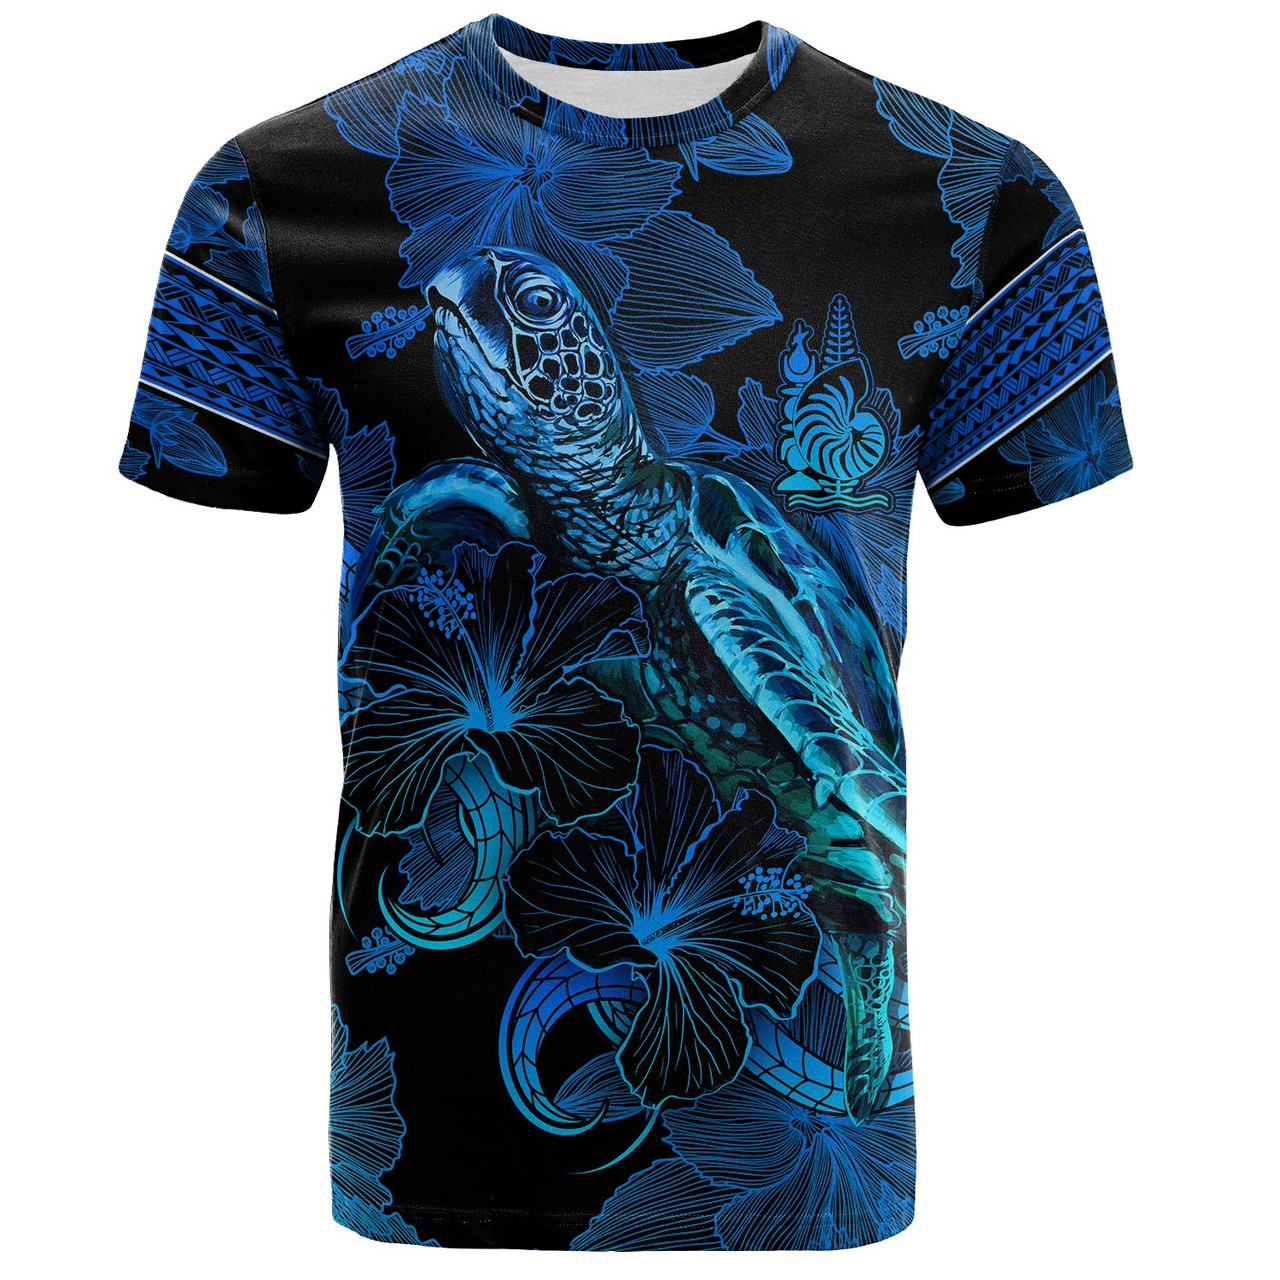 New Caledonia T-Shirt Sea Turtle With Blooming Hibiscus Flowers Tribal Blue